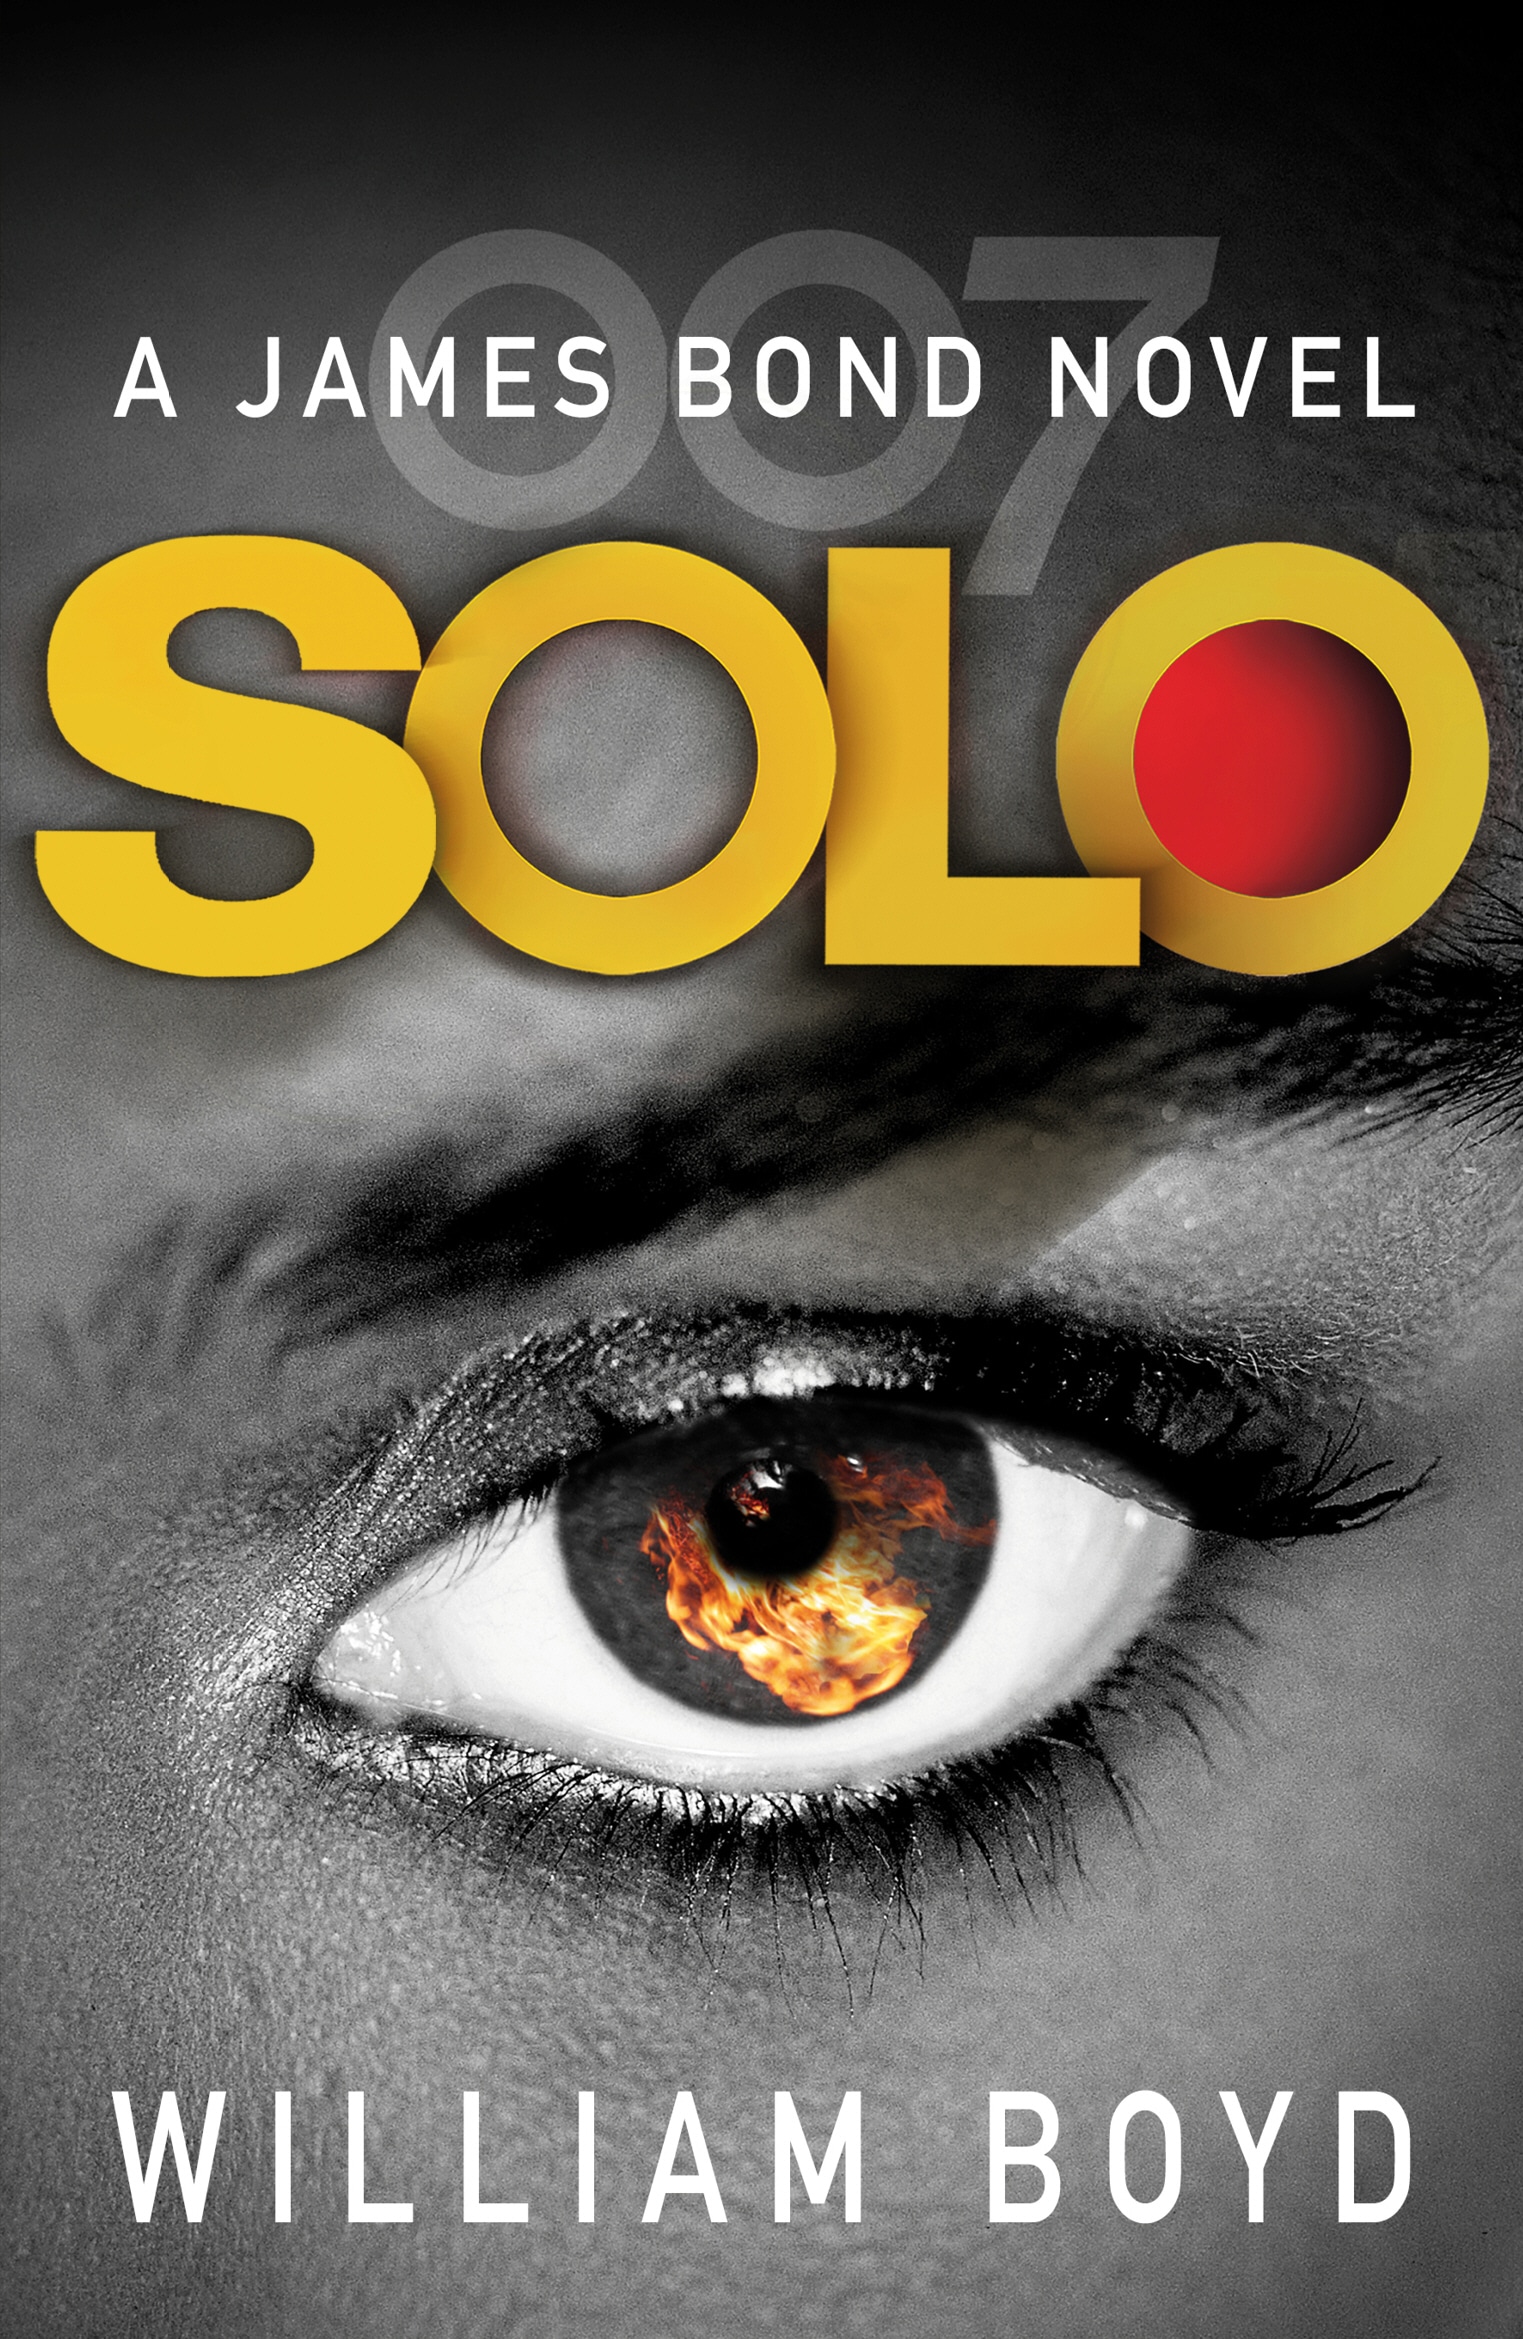 Book “Solo” by William Boyd — May 8, 2014